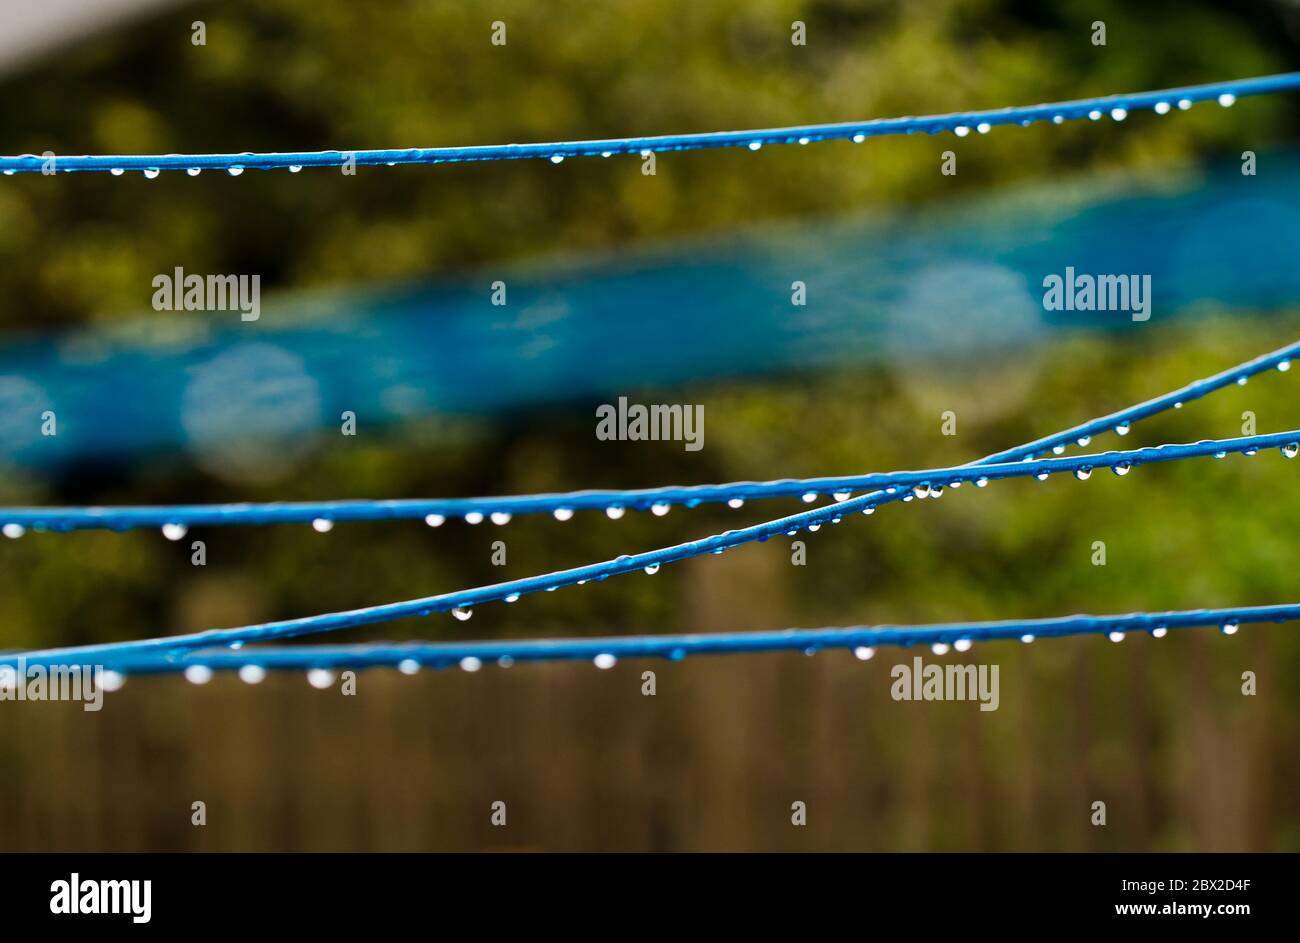 https://c8.alamy.com/comp/2BX2D4F/blue-clothing-lines-of-a-clothes-spin-with-many-raindrops-at-the-string-in-front-of-a-green-background-after-the-rain-retro-way-of-doing-the-laundry-2BX2D4F.jpg